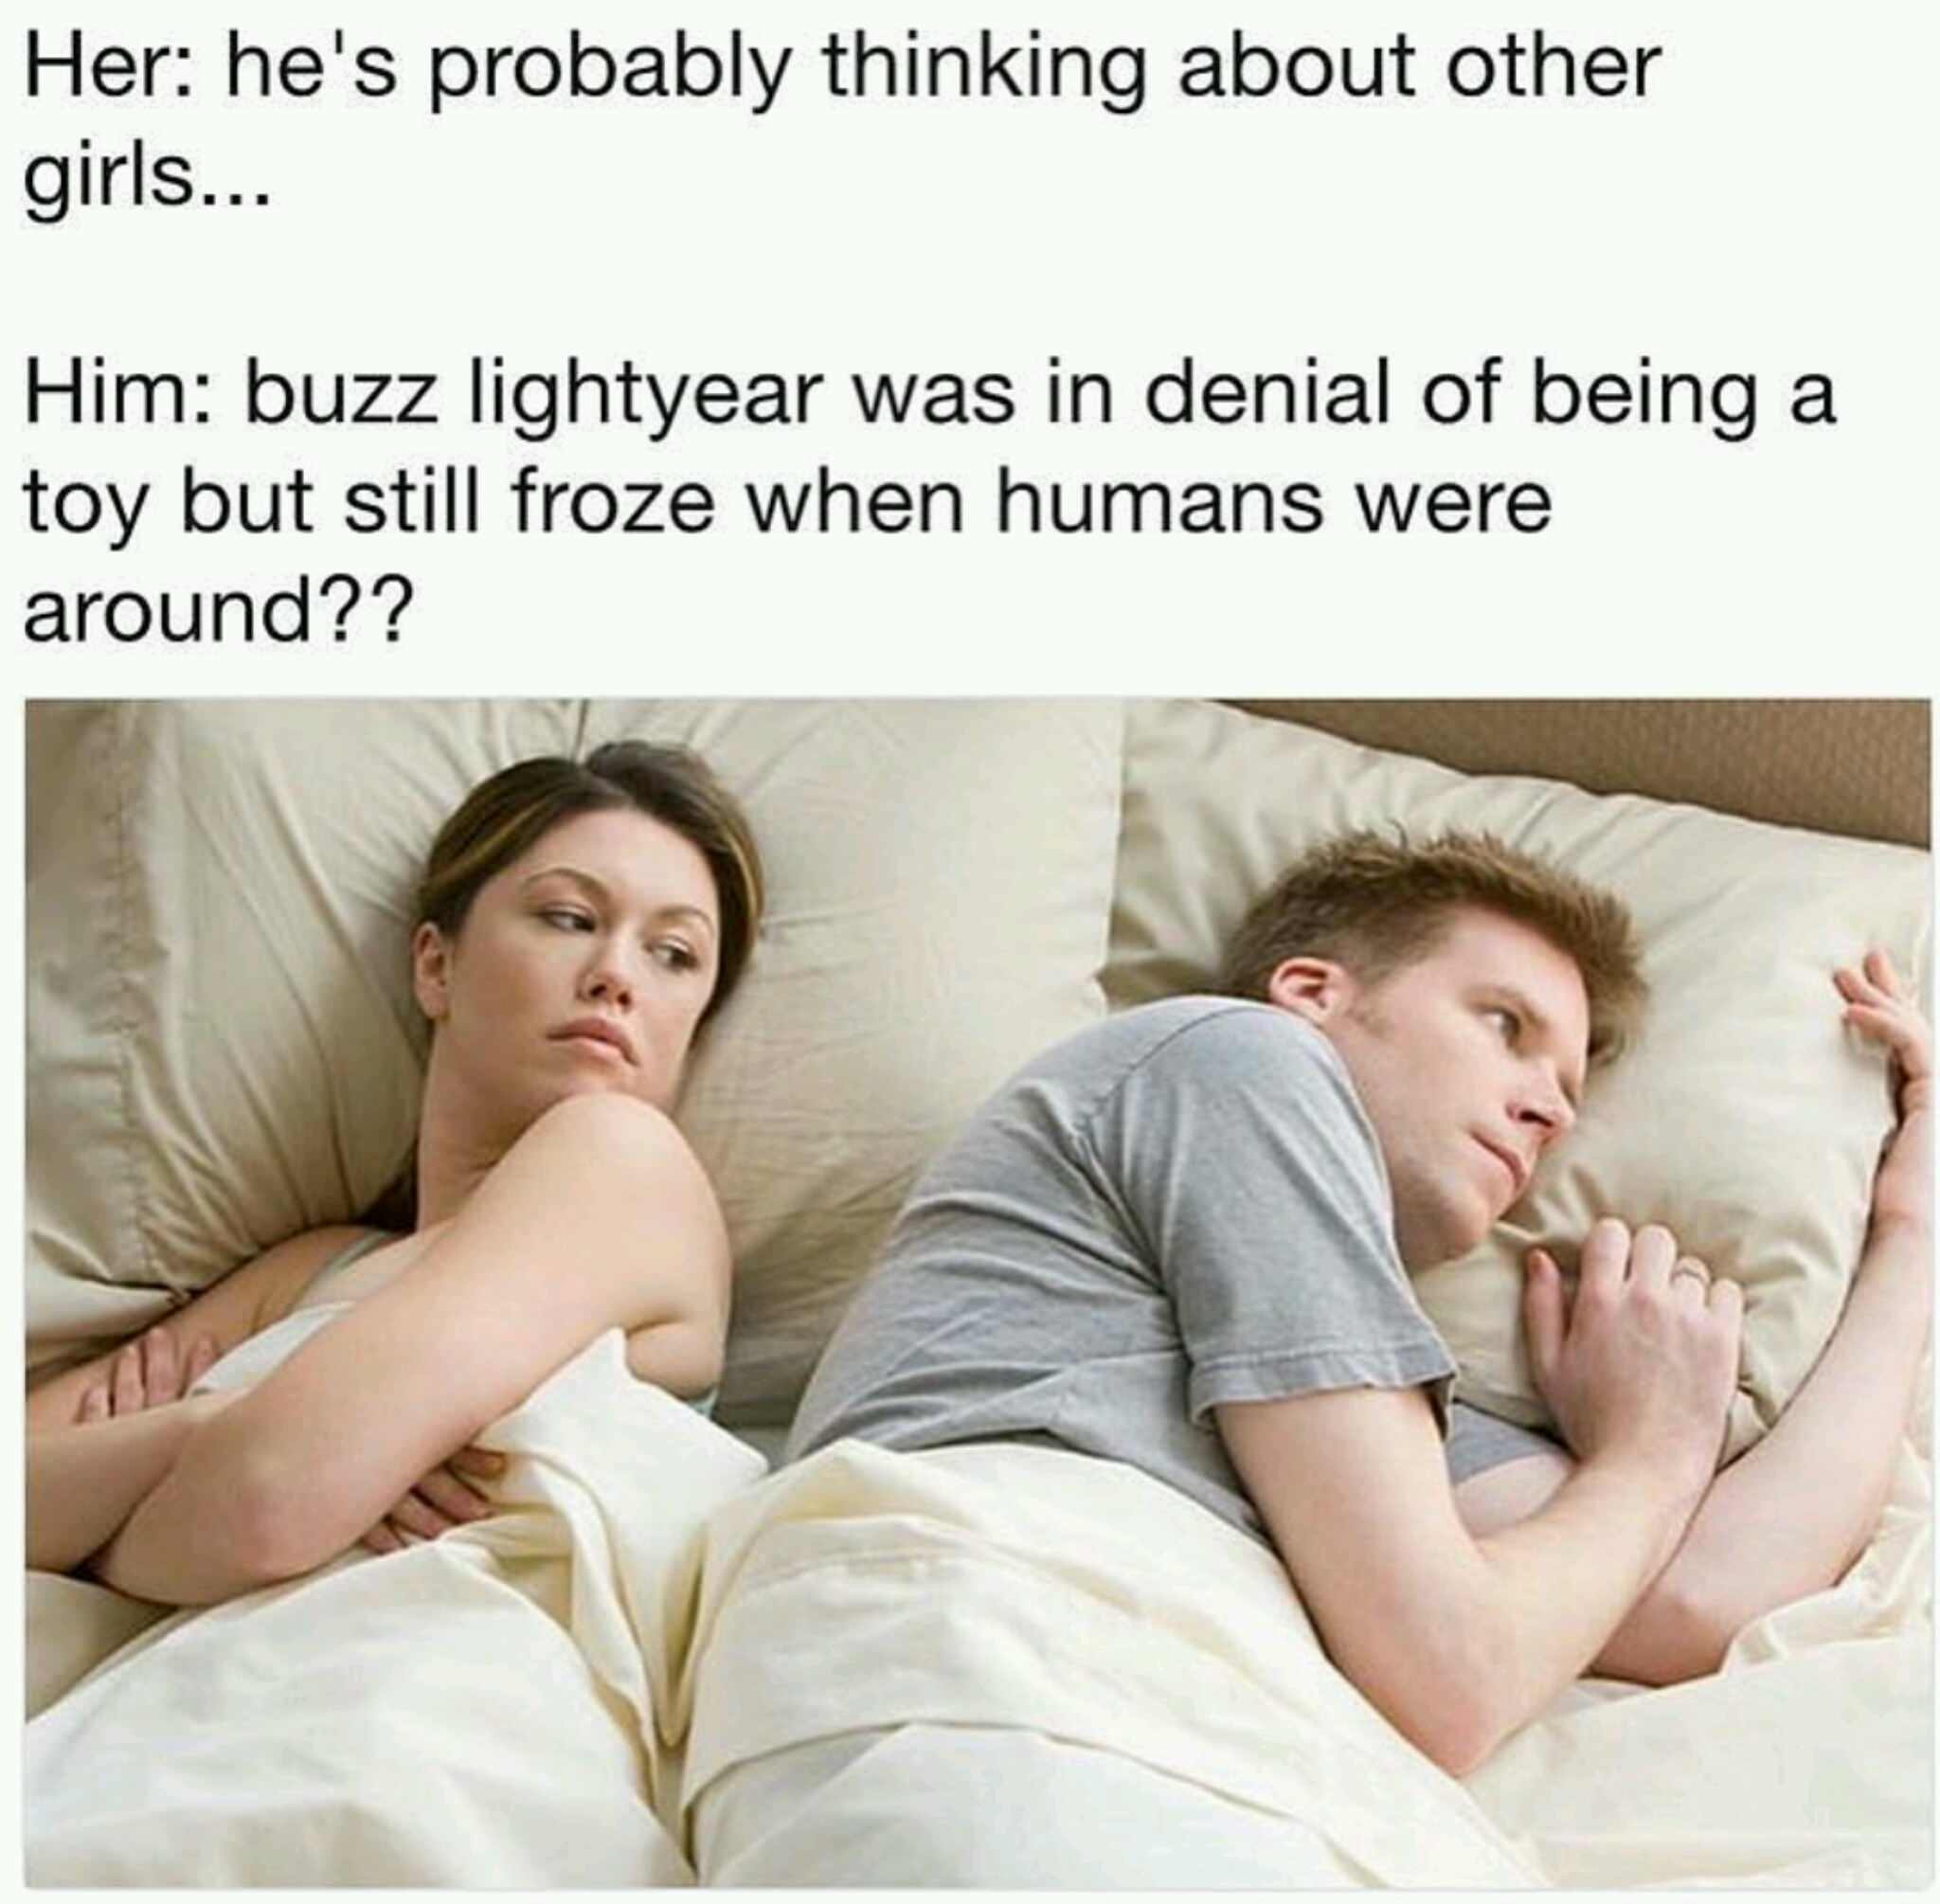 thinking about other girl meme - Her he's probably thinking about other girls... Him buzz lightyear was in denial of being a toy but still froze when humans were around??